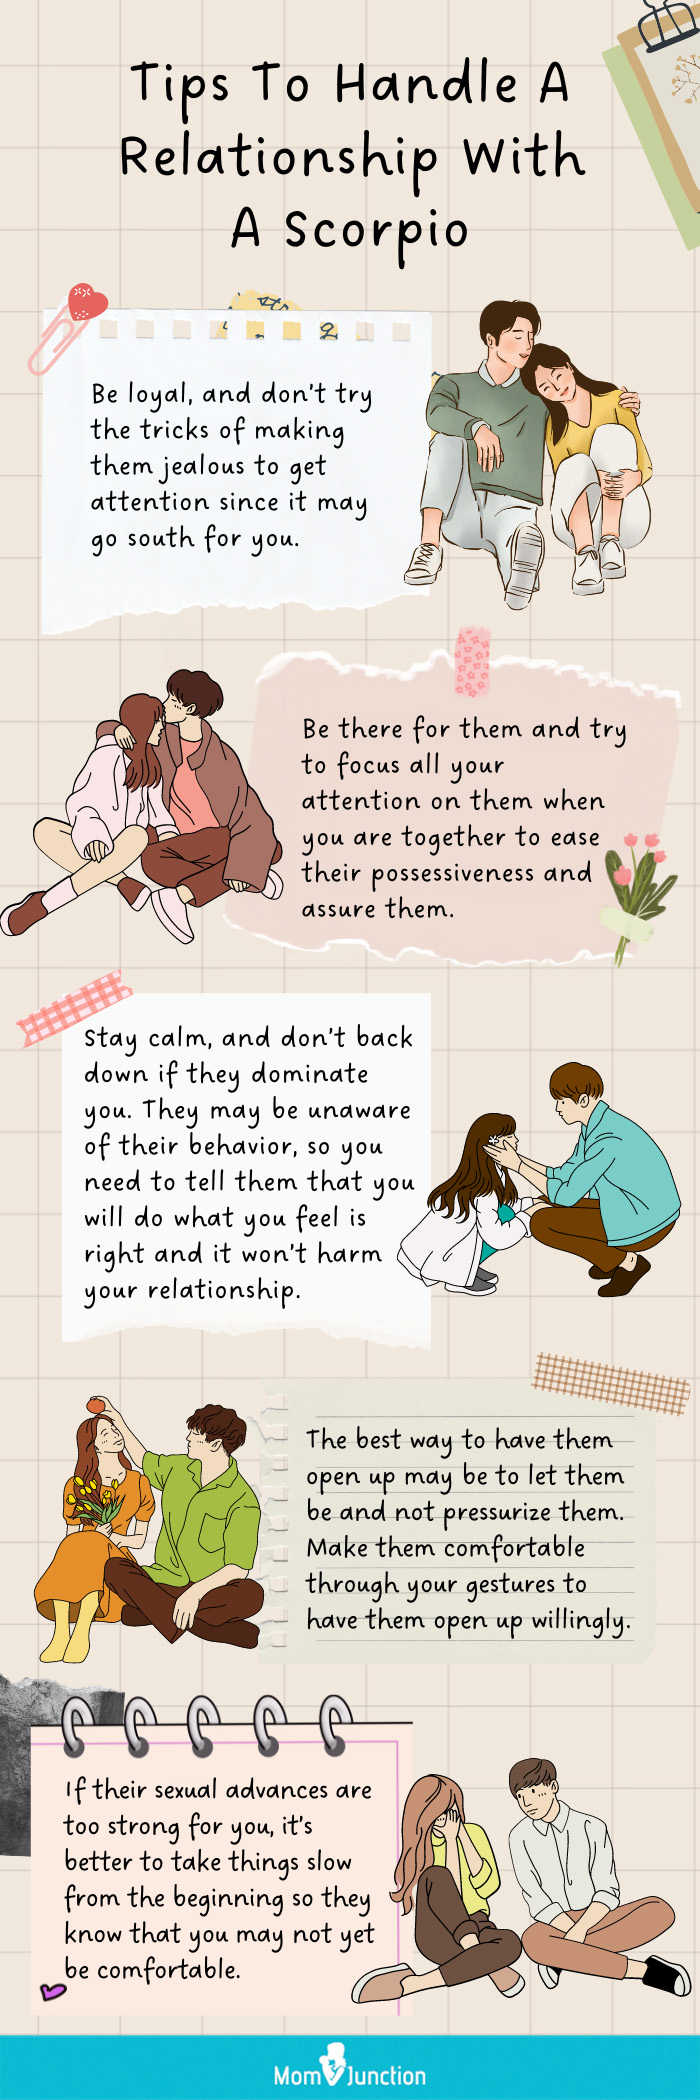 tips to handle a relationship with a scorpio (infographic)